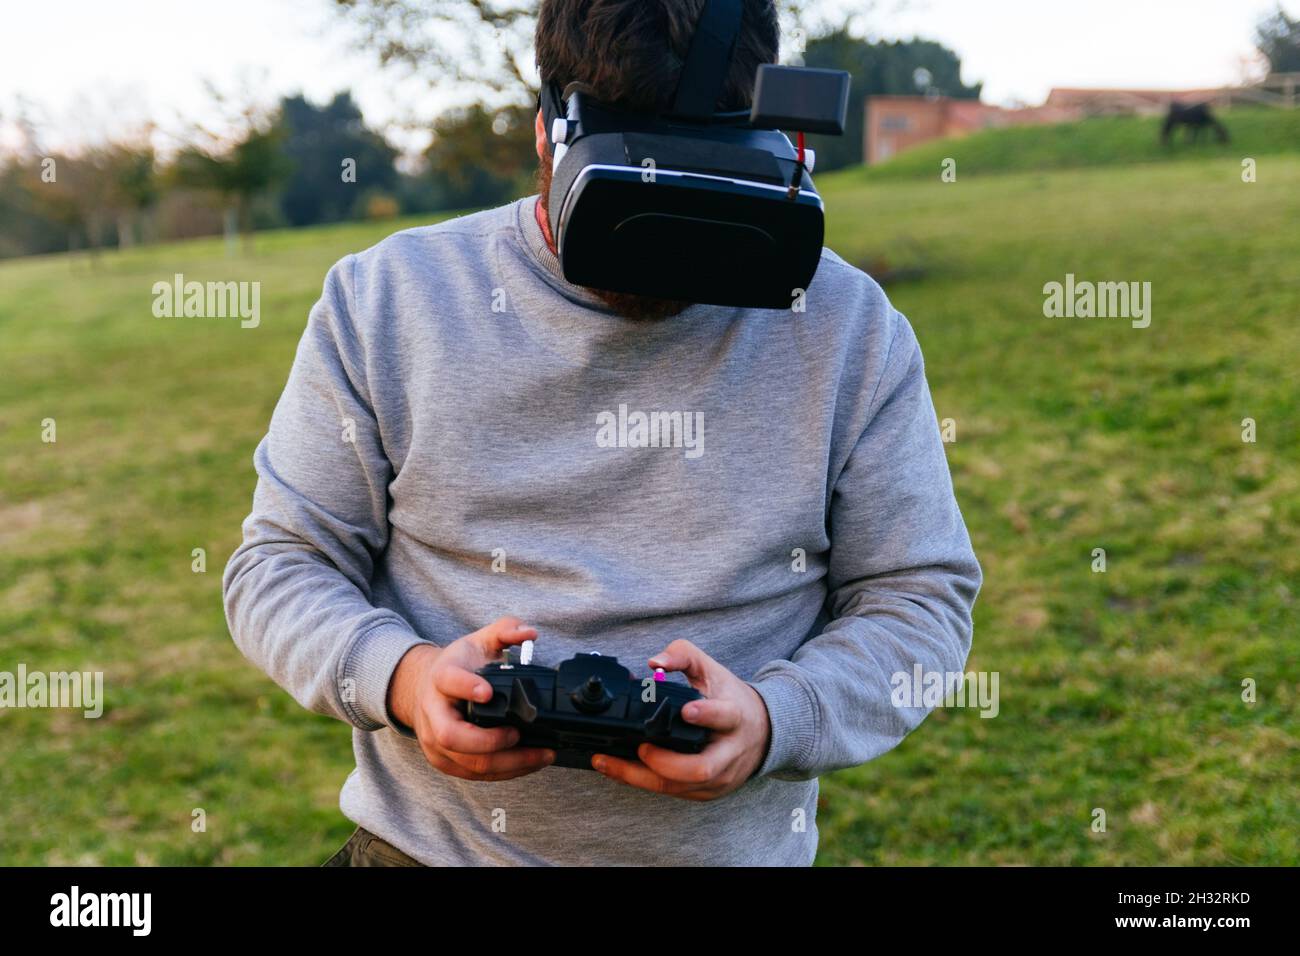 Man with virtual reality goggles and drone control controller Stock Photo